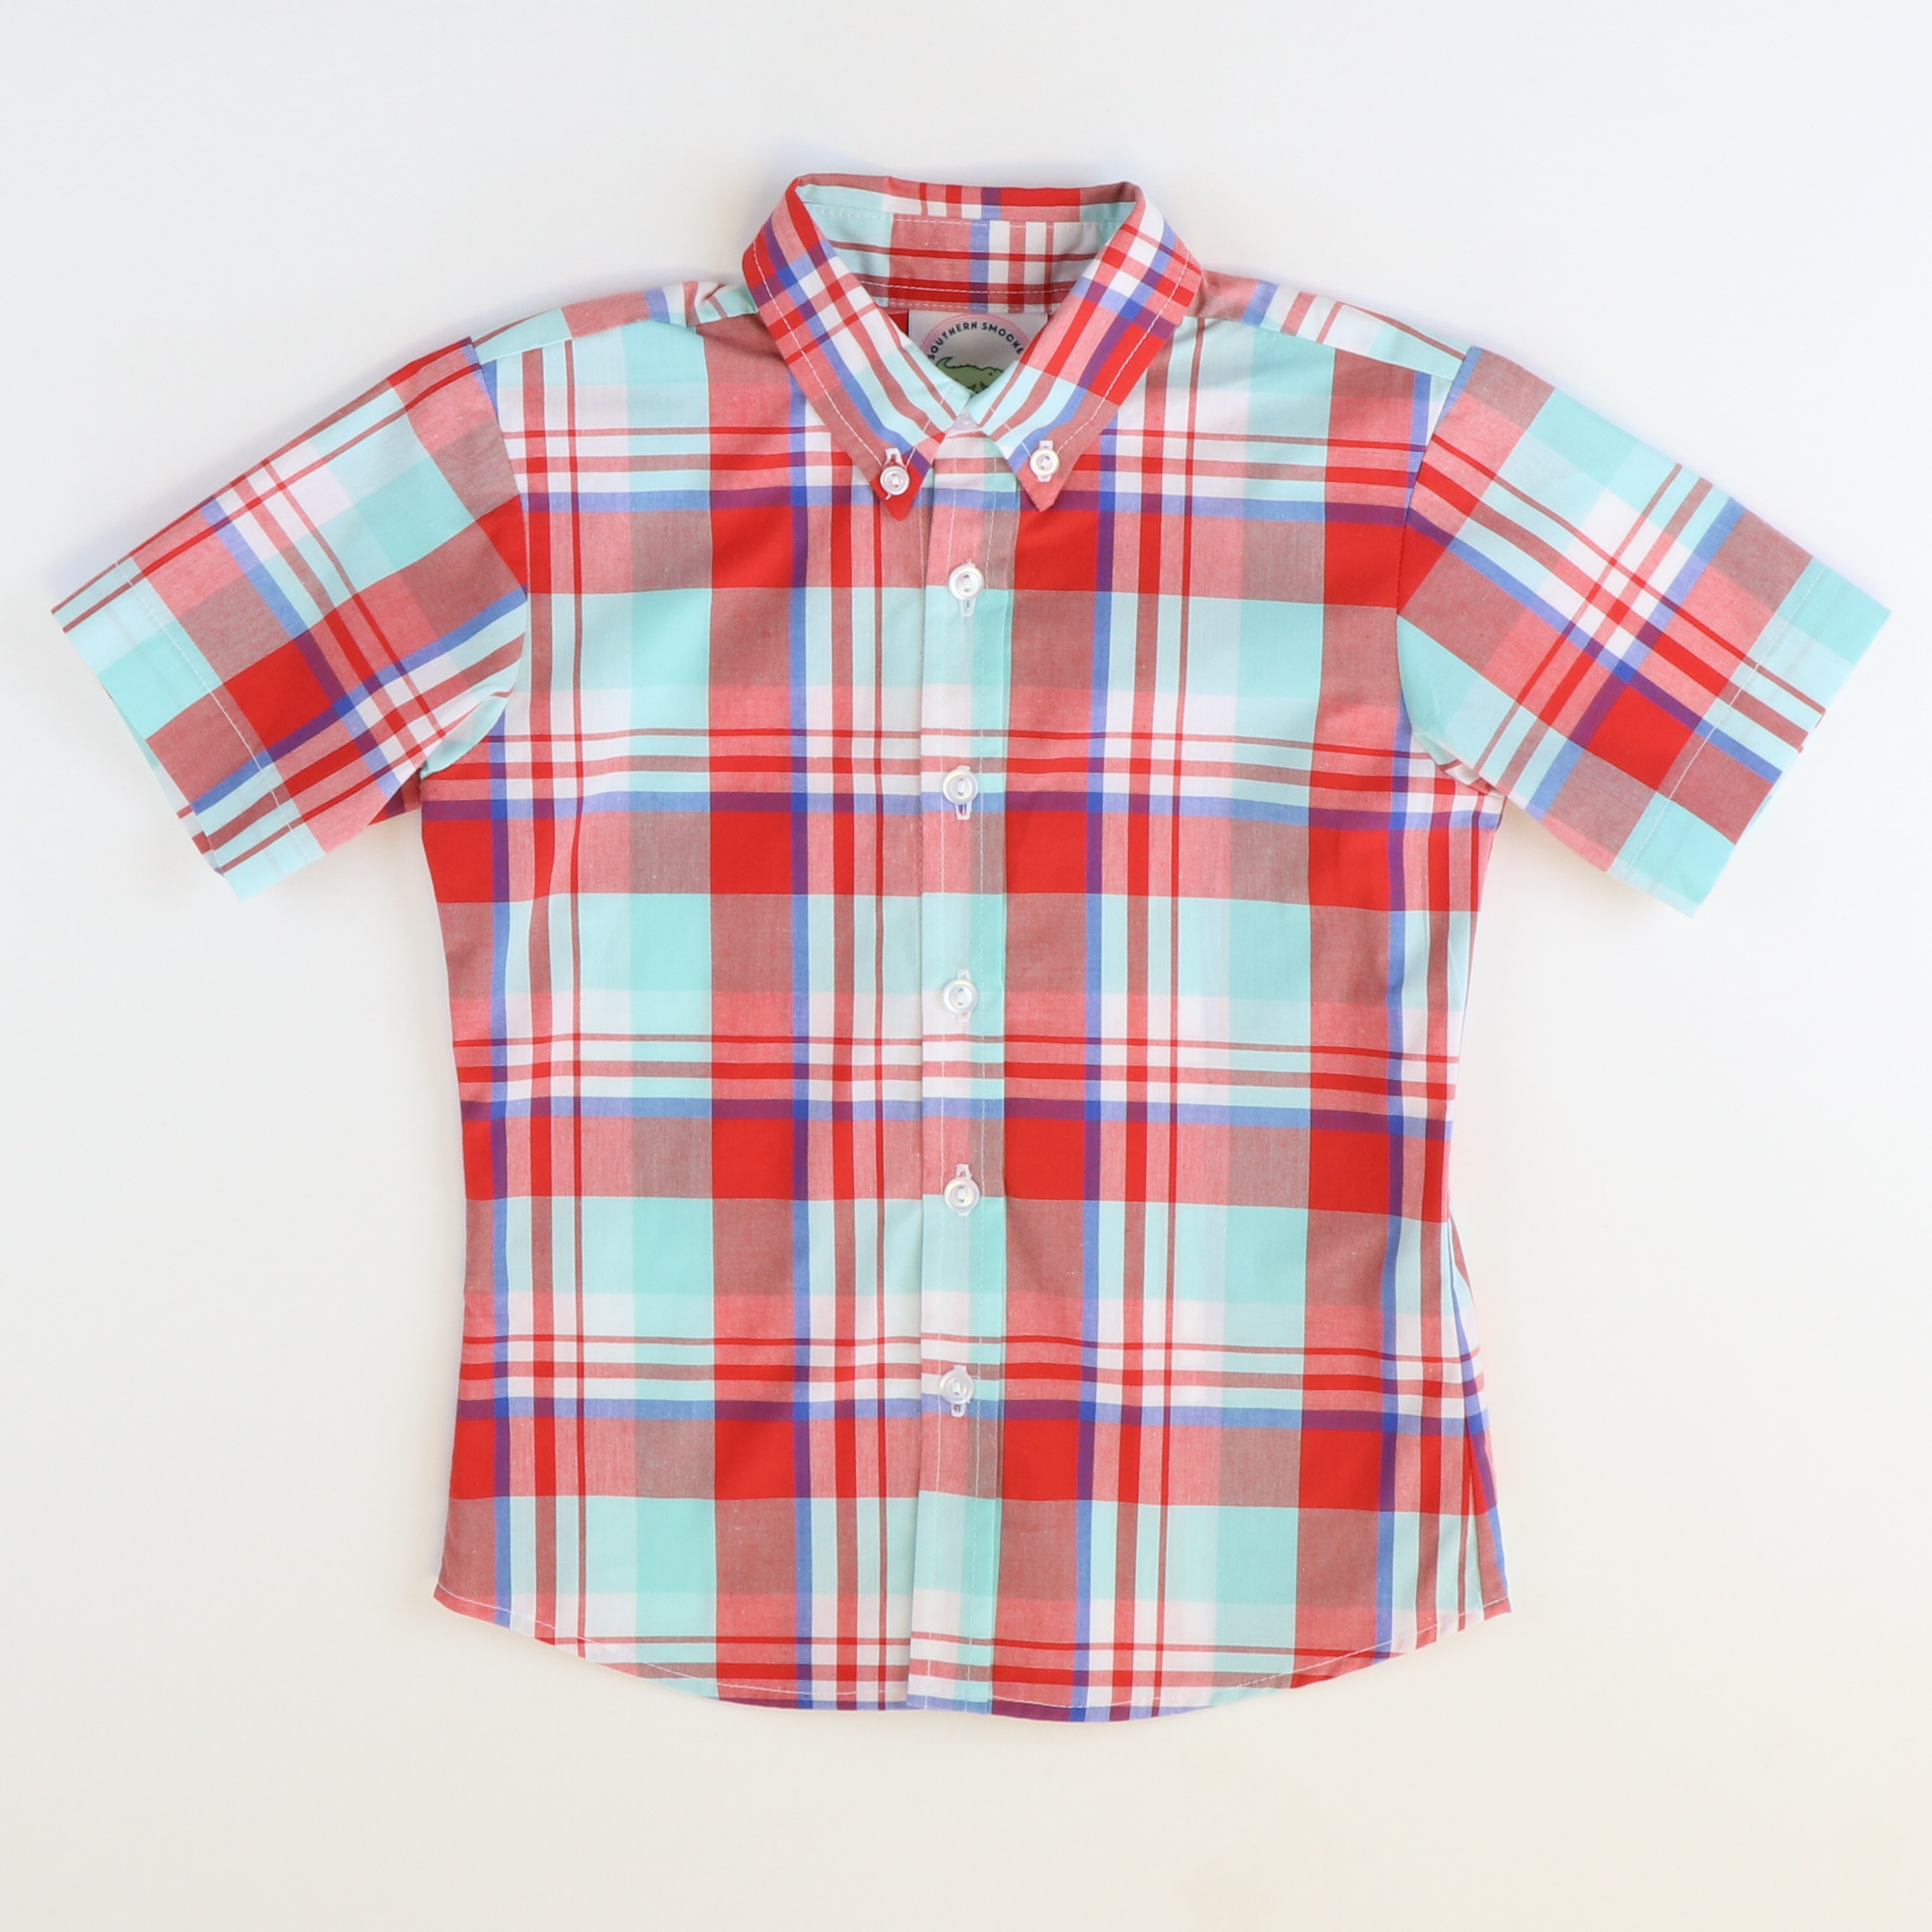 Signature Button Down Shirt - Red, Blue, & Turquoise Plaid - Stellybelly